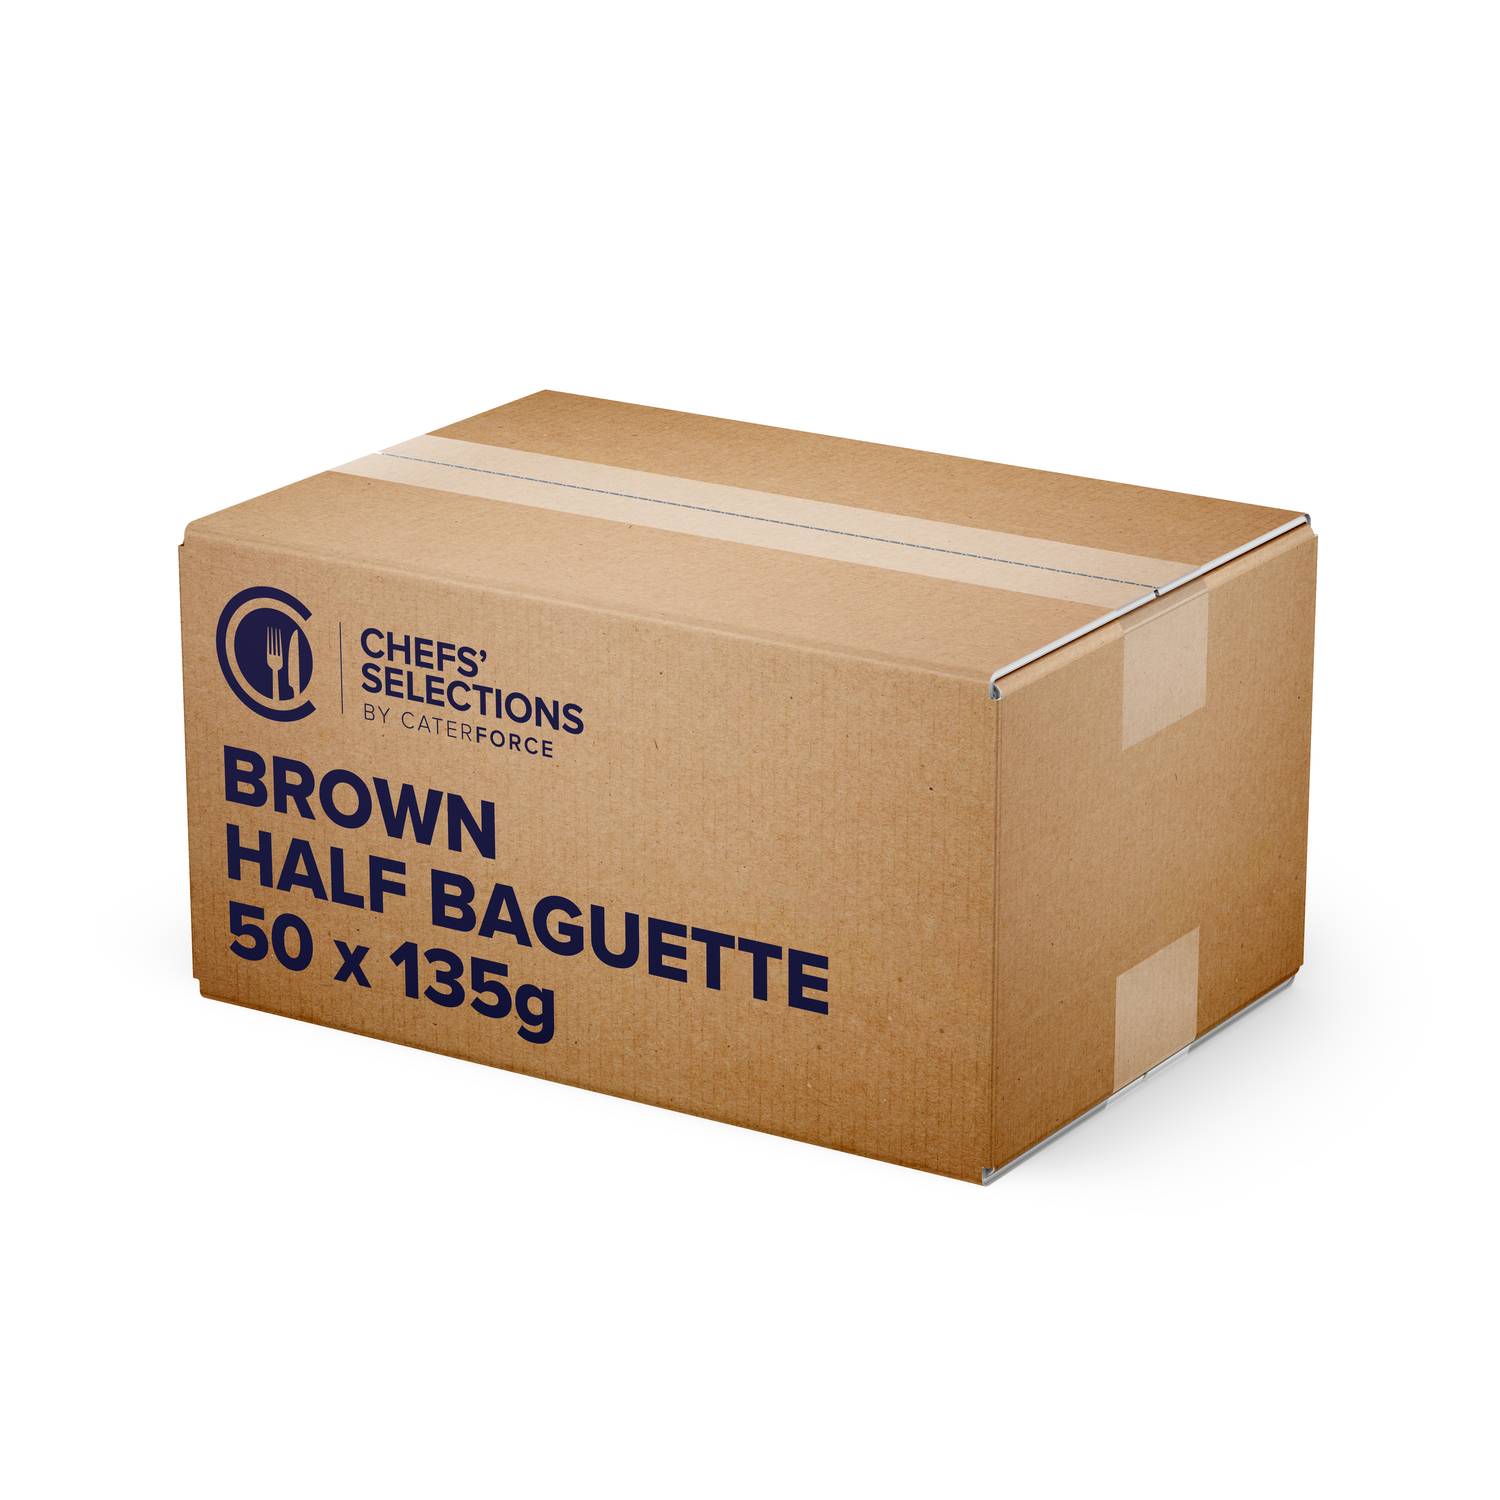 Chefs’ Selections Brown Half Baguettes (50 x 135g)